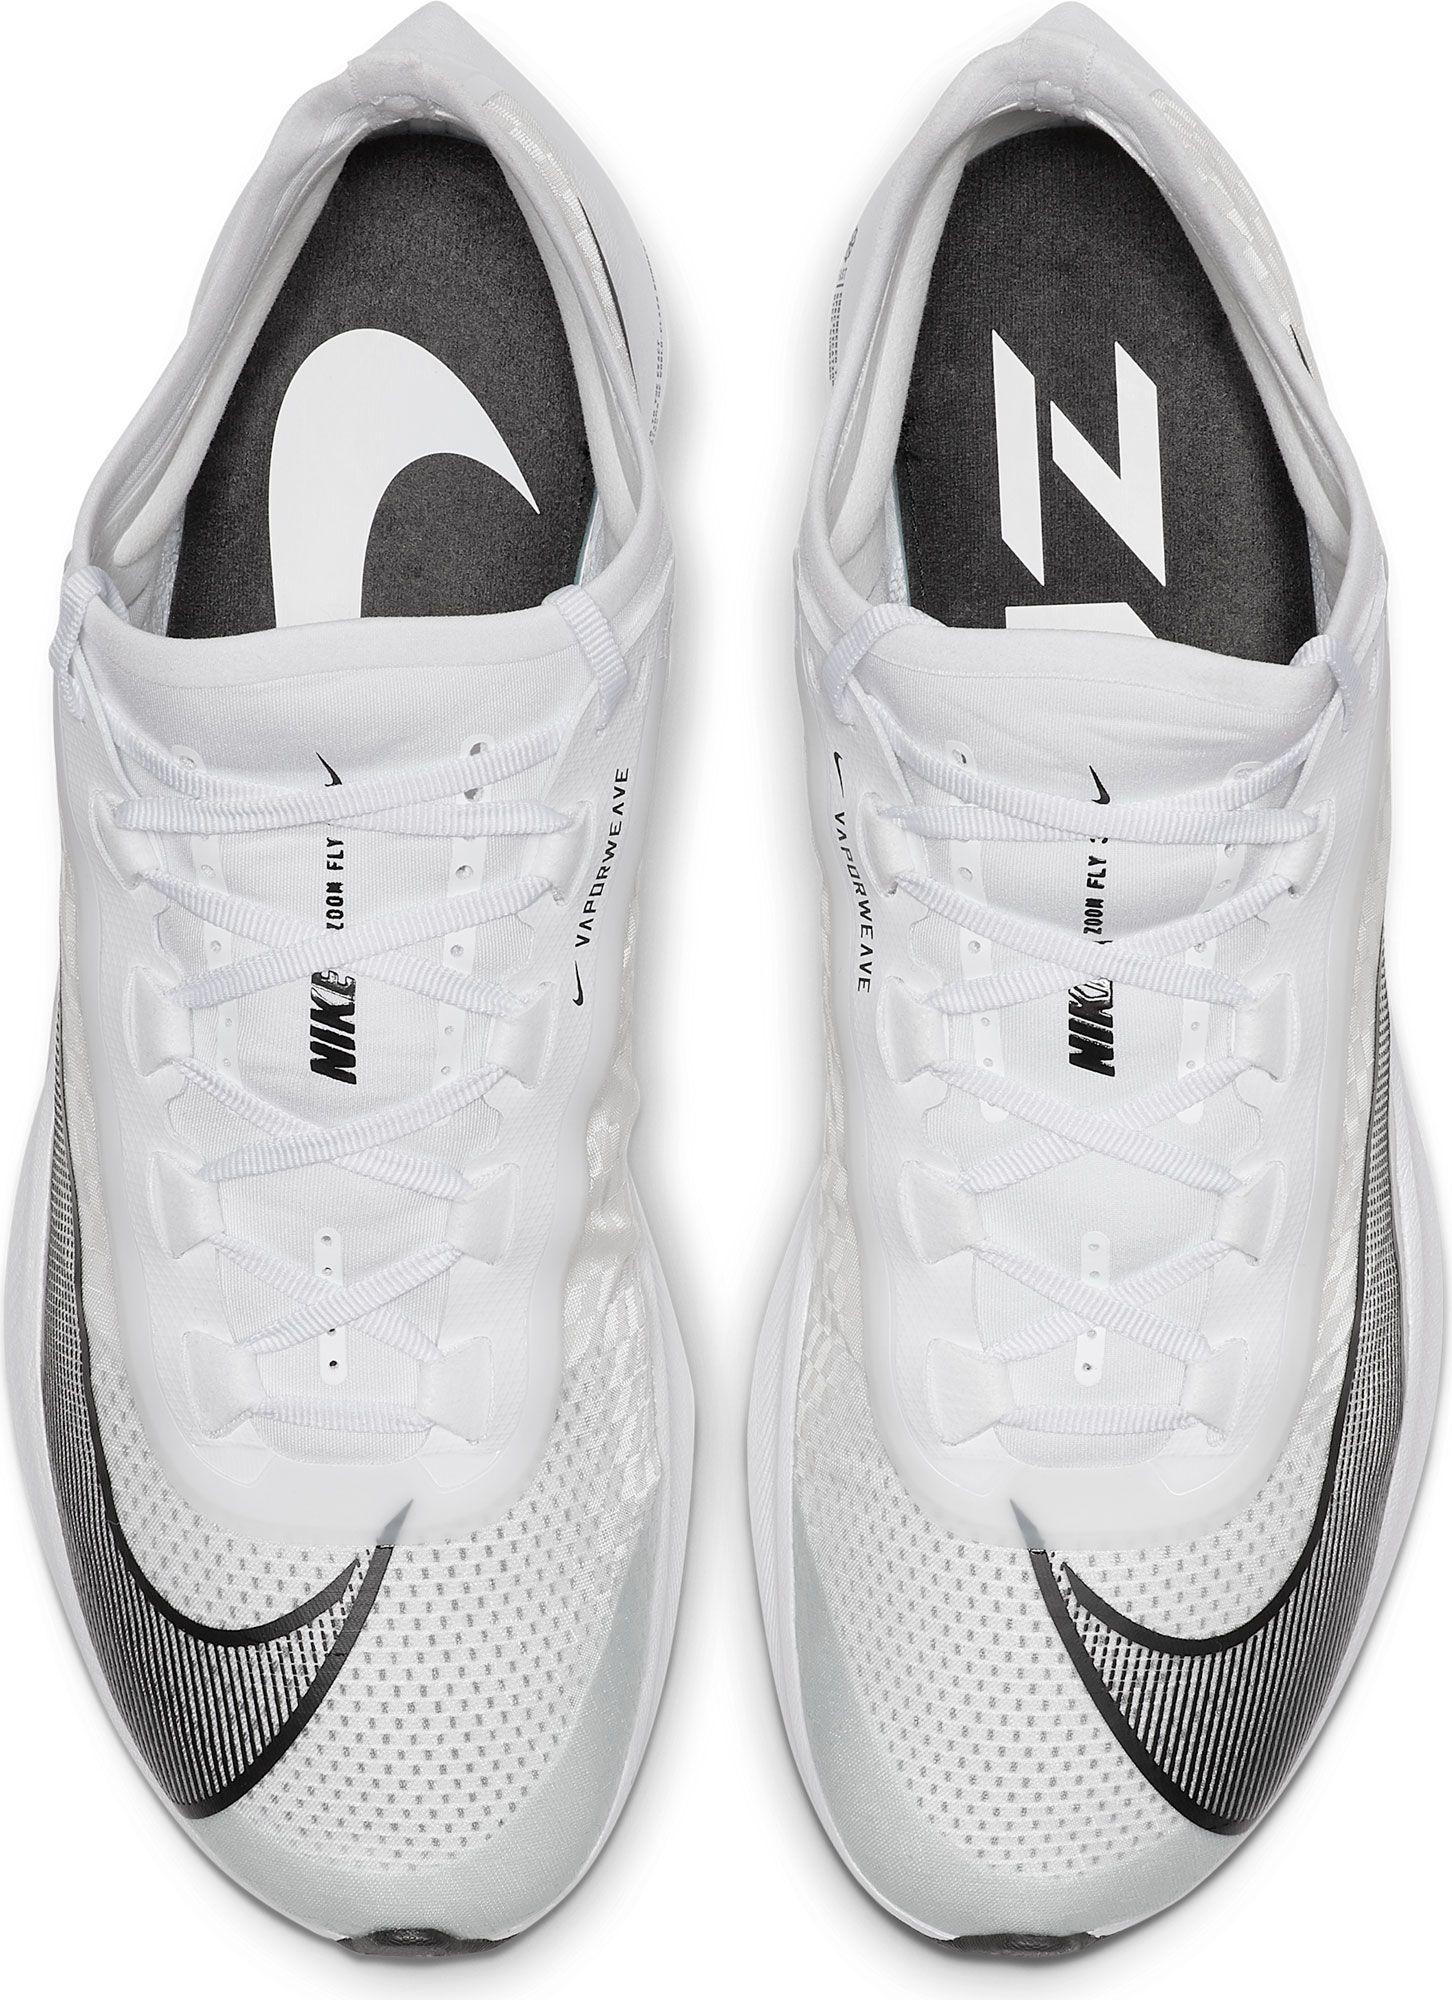 Nike Rubber Zoom Fly 3 Racing Flats in White/Black (White) for Men | Lyst